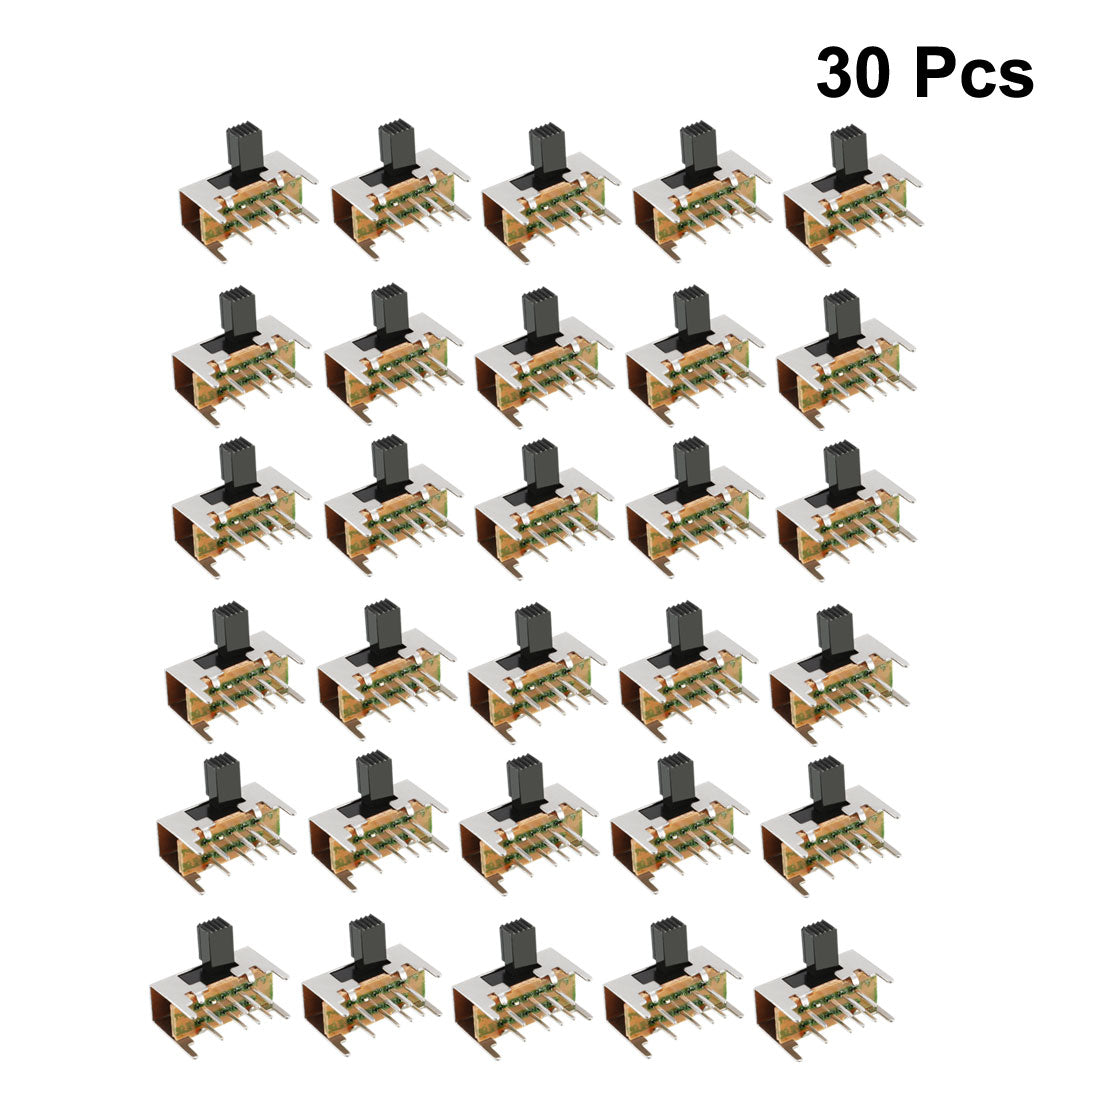 uxcell Uxcell 30Pcs 6mm Horizontal Slide Switch DP3T 2P3T 8 Terminals PCB Panel Latching